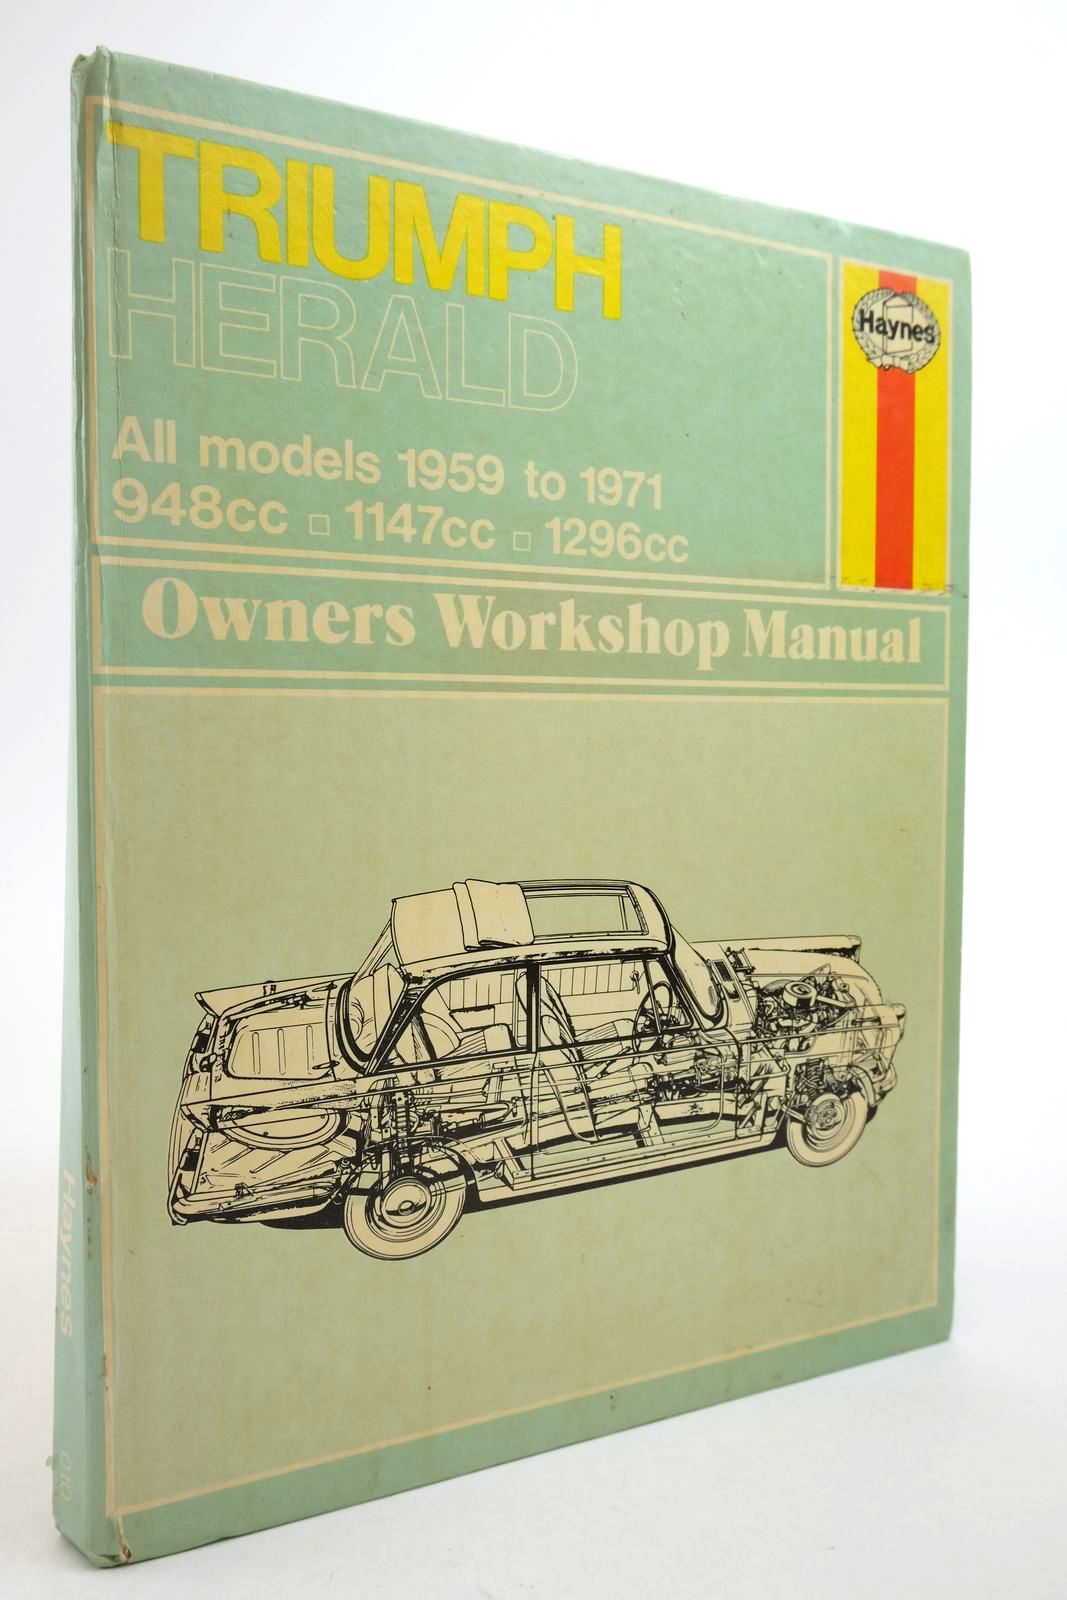 Photo of TRIUMPH HERALD OWNERS WORKSHOP MANUAL written by Maclay, J.L.S. published by Haynes Publishing Group (STOCK CODE: 2140726)  for sale by Stella & Rose's Books